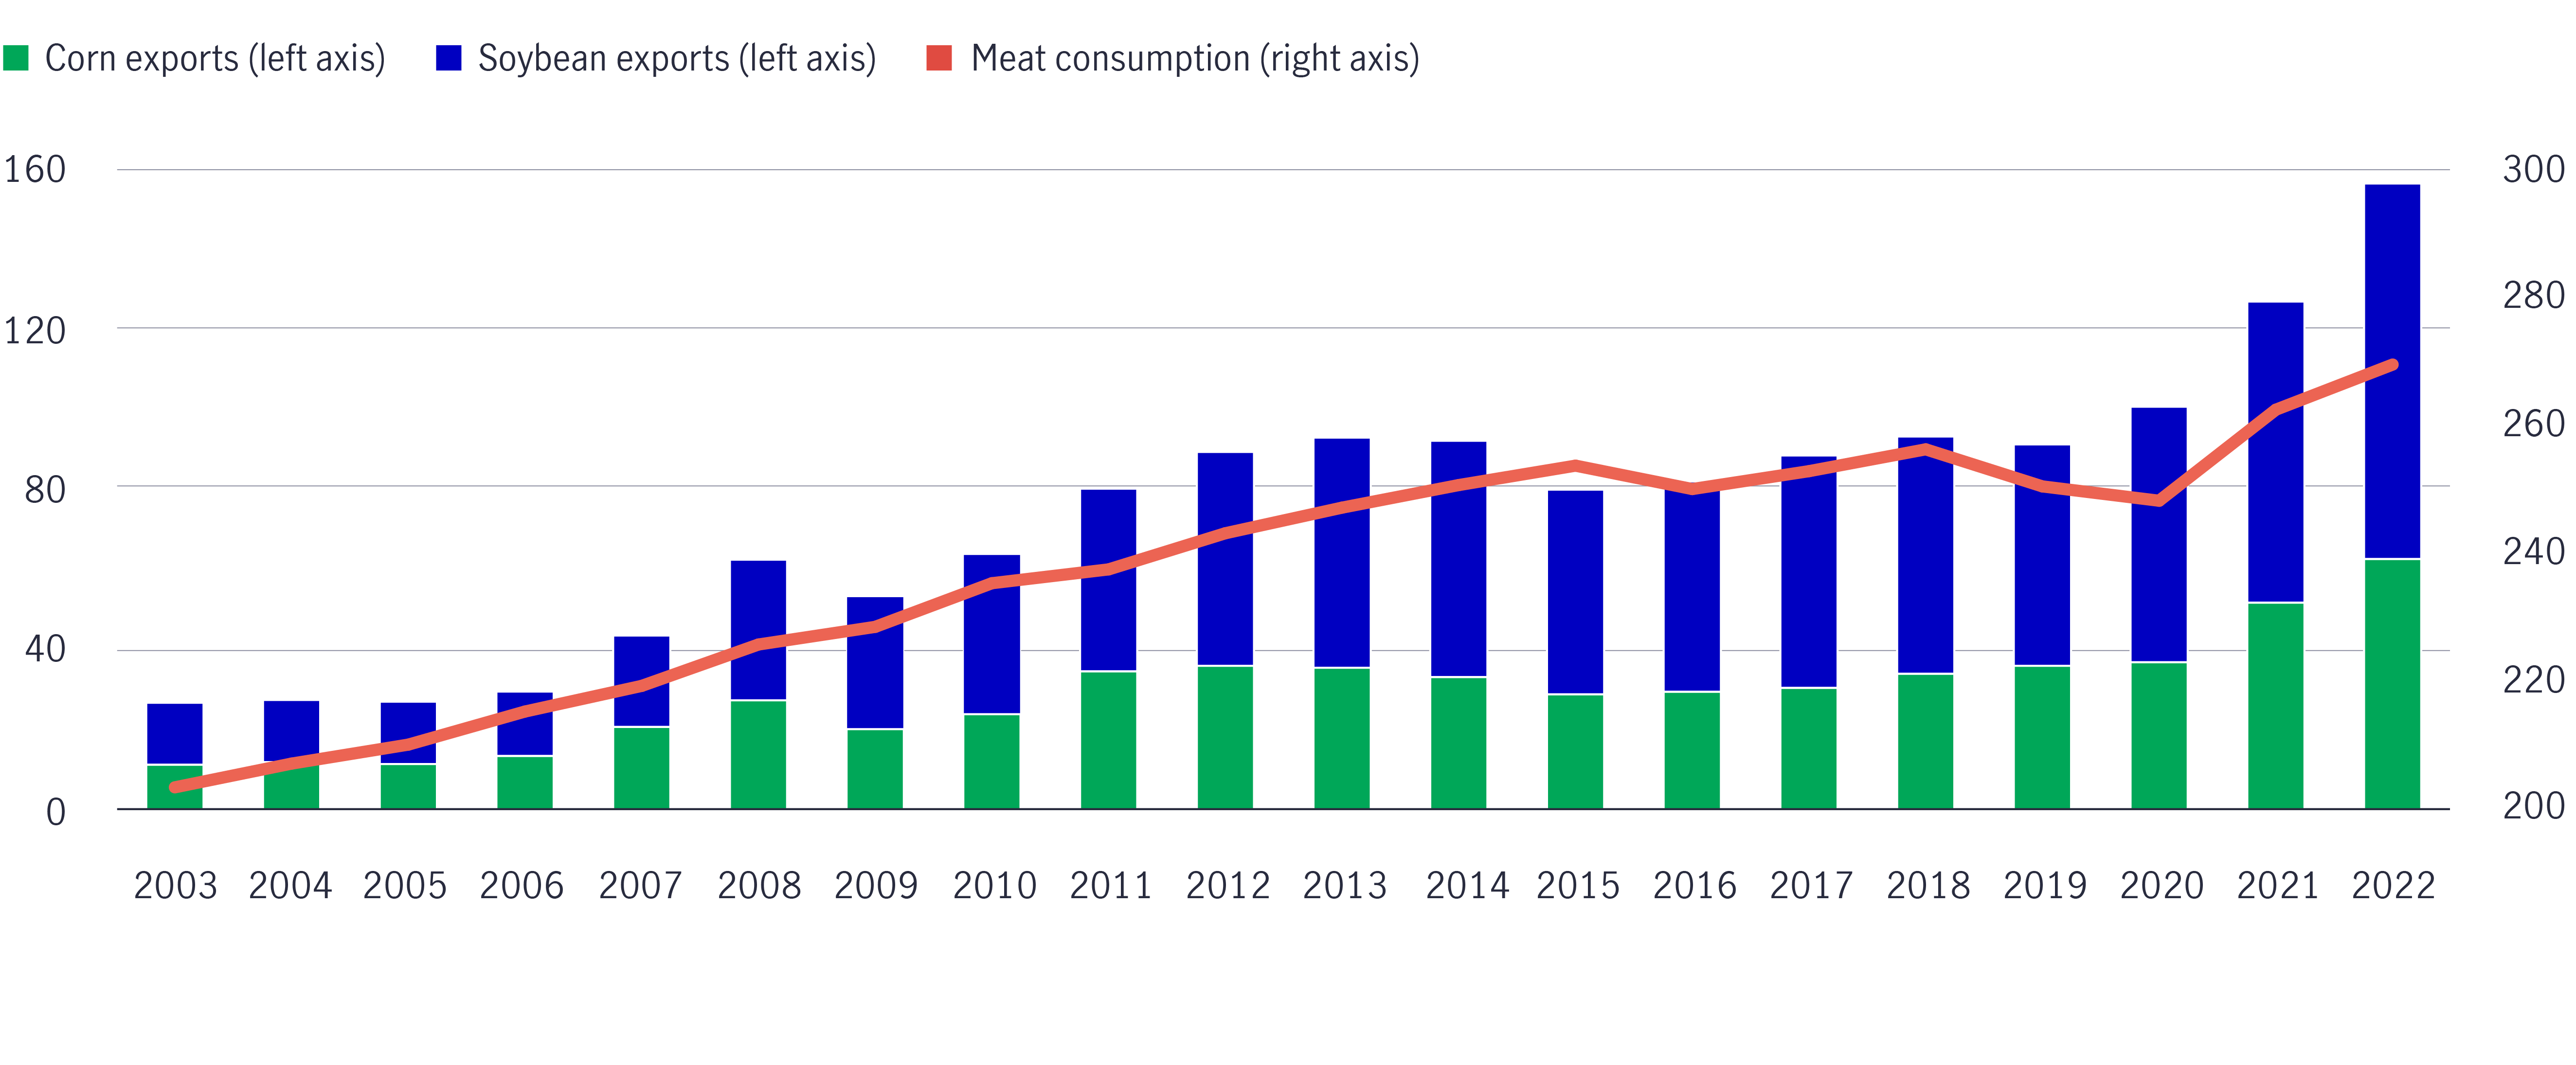 A bar chart shows the increase in global corn and soybean exports between 2003 and 2022, driven by rising meat consumption.